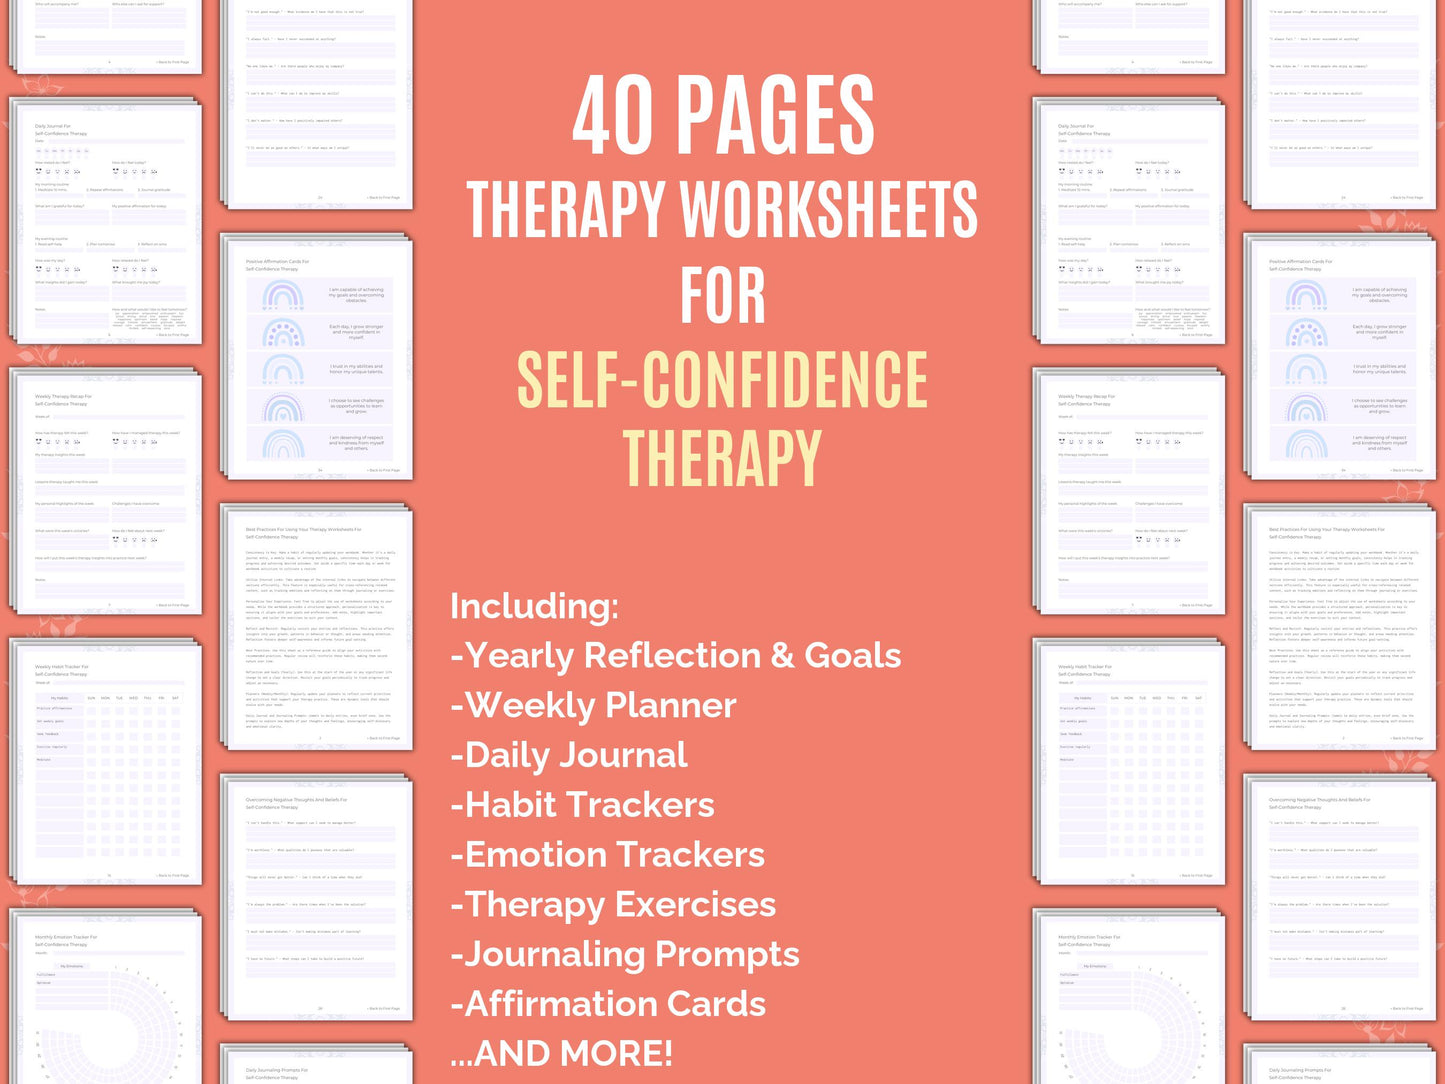 Planners, Journaling, Journals, Resources, Cheat Sheet, Goal Setting, Notes, Therapy, Counseling, Workbooks, Self-Confidence Therapy, Tools, Templates